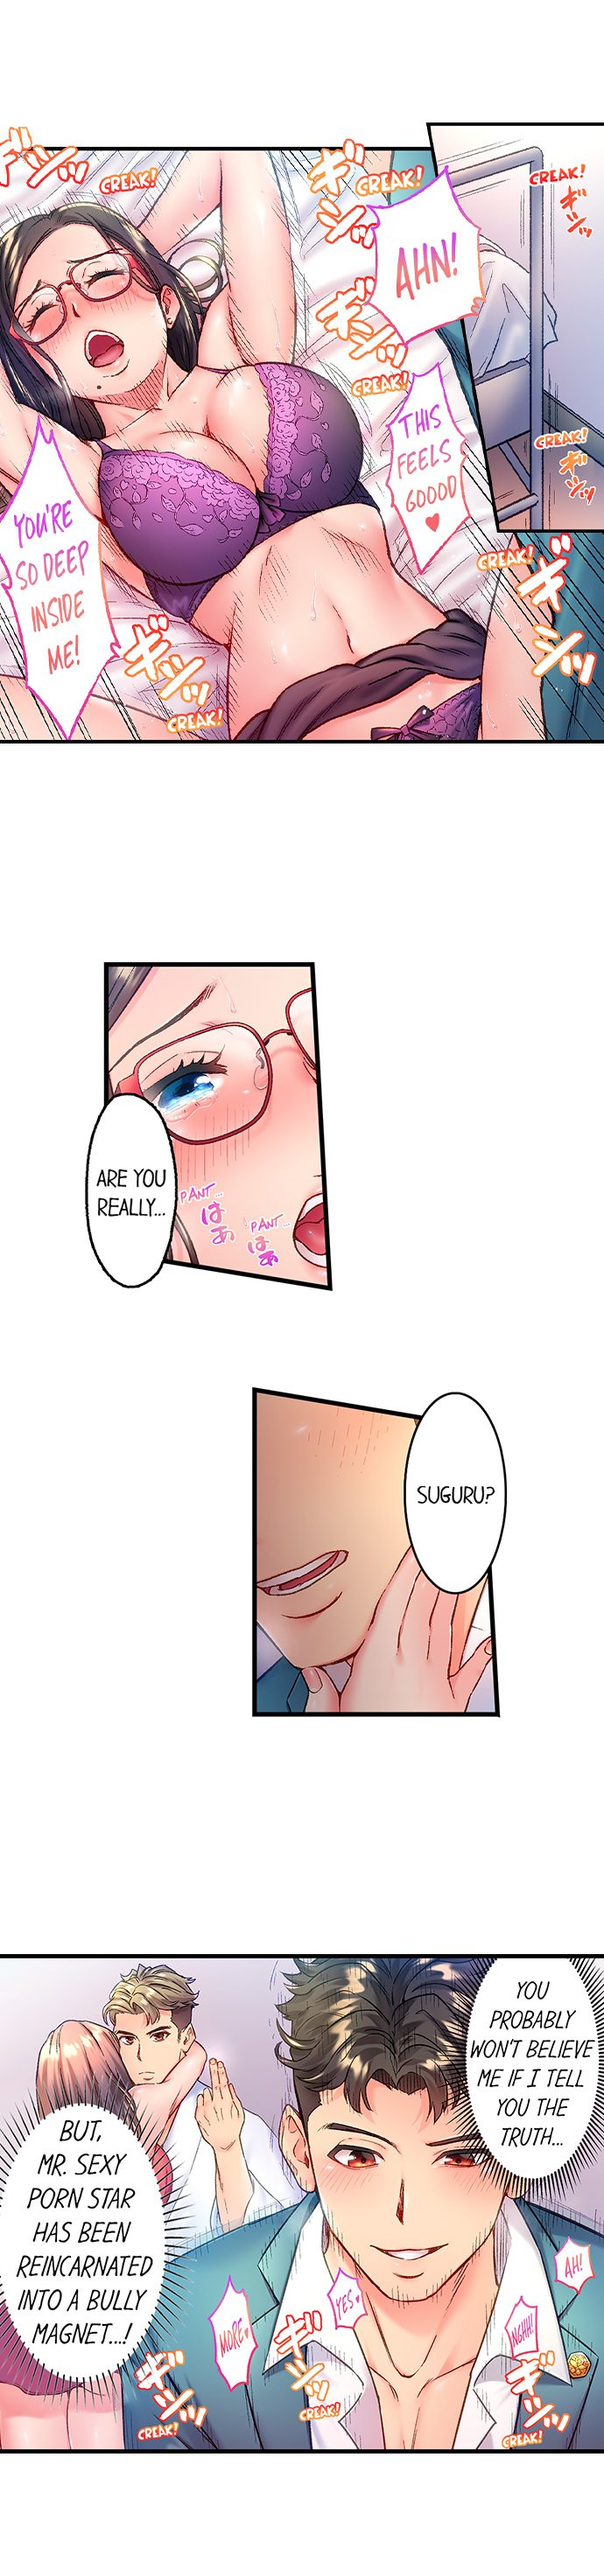 The Porn Star Reincarnated Into a Bullied Boy - Chapter 1 Page 9